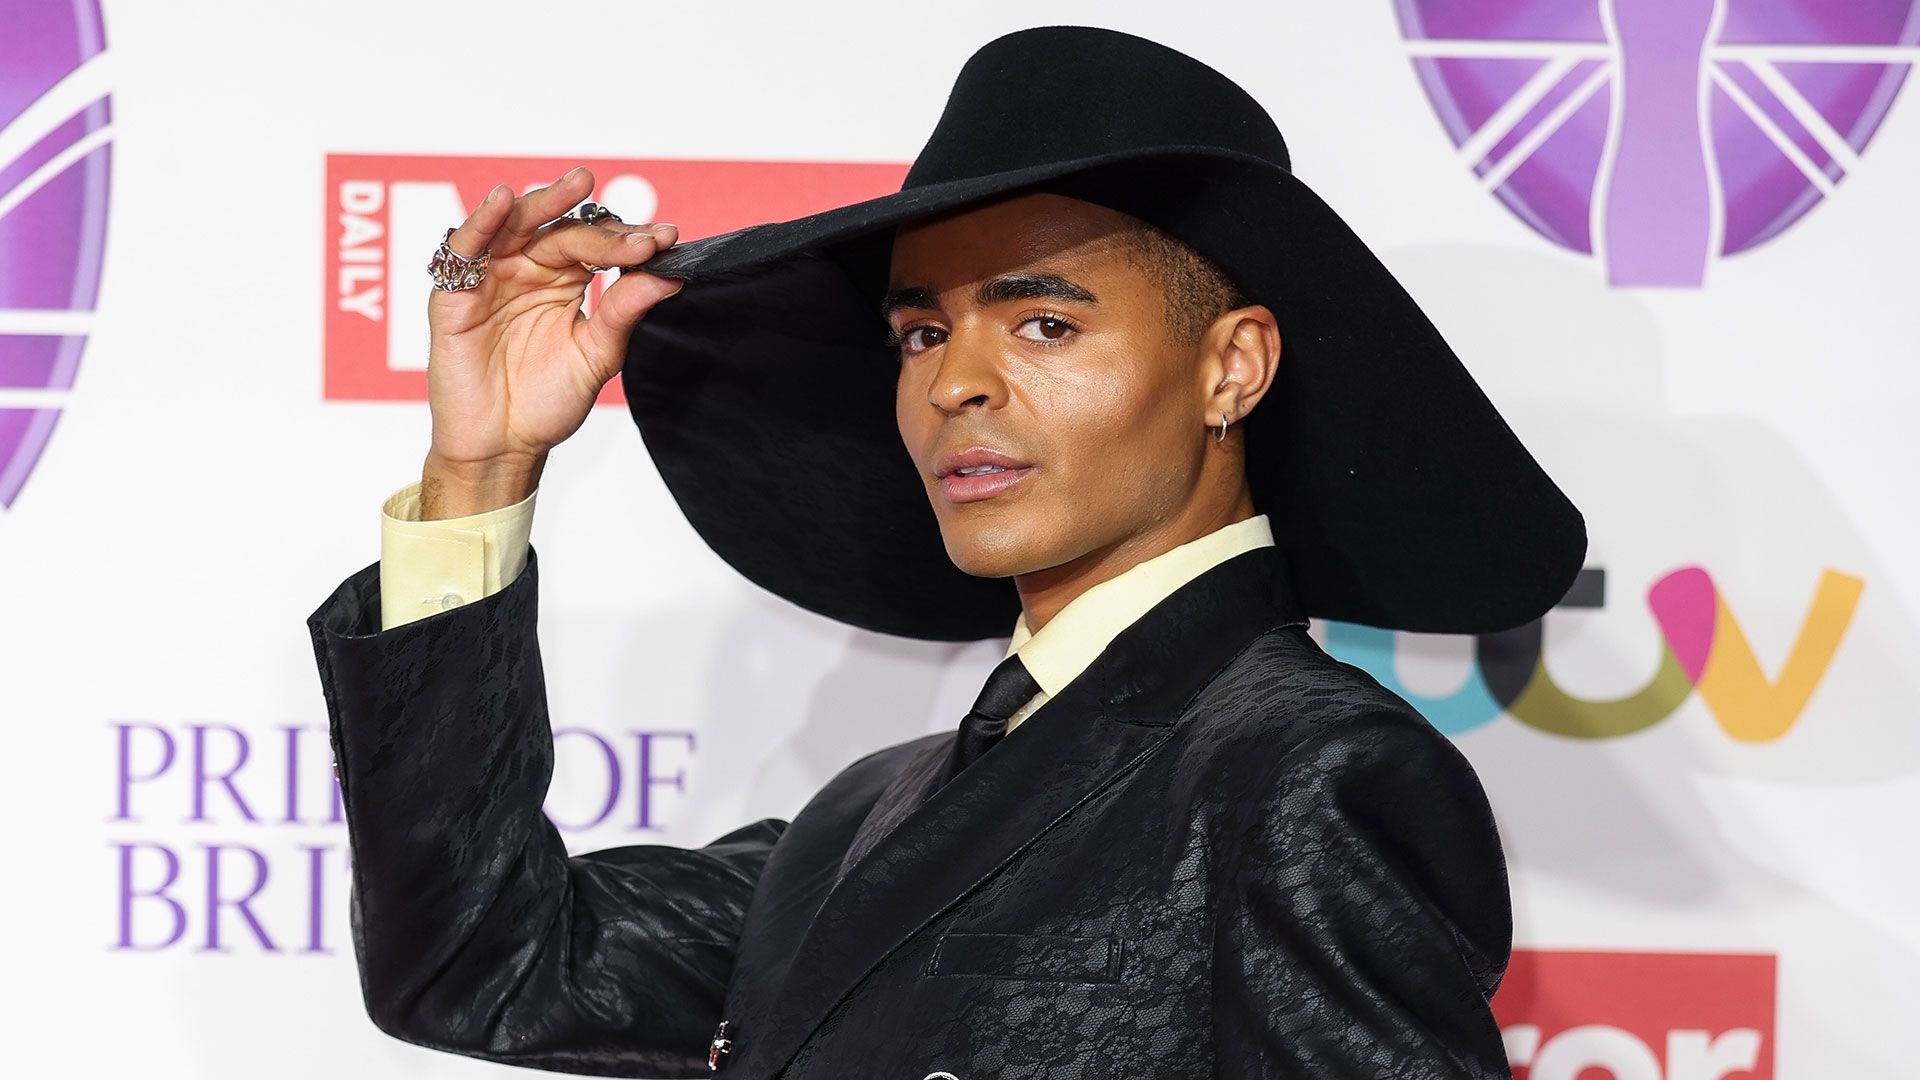 Layton Williams wearing a statement hat and black suit at the Pride of Britain Awards 2023